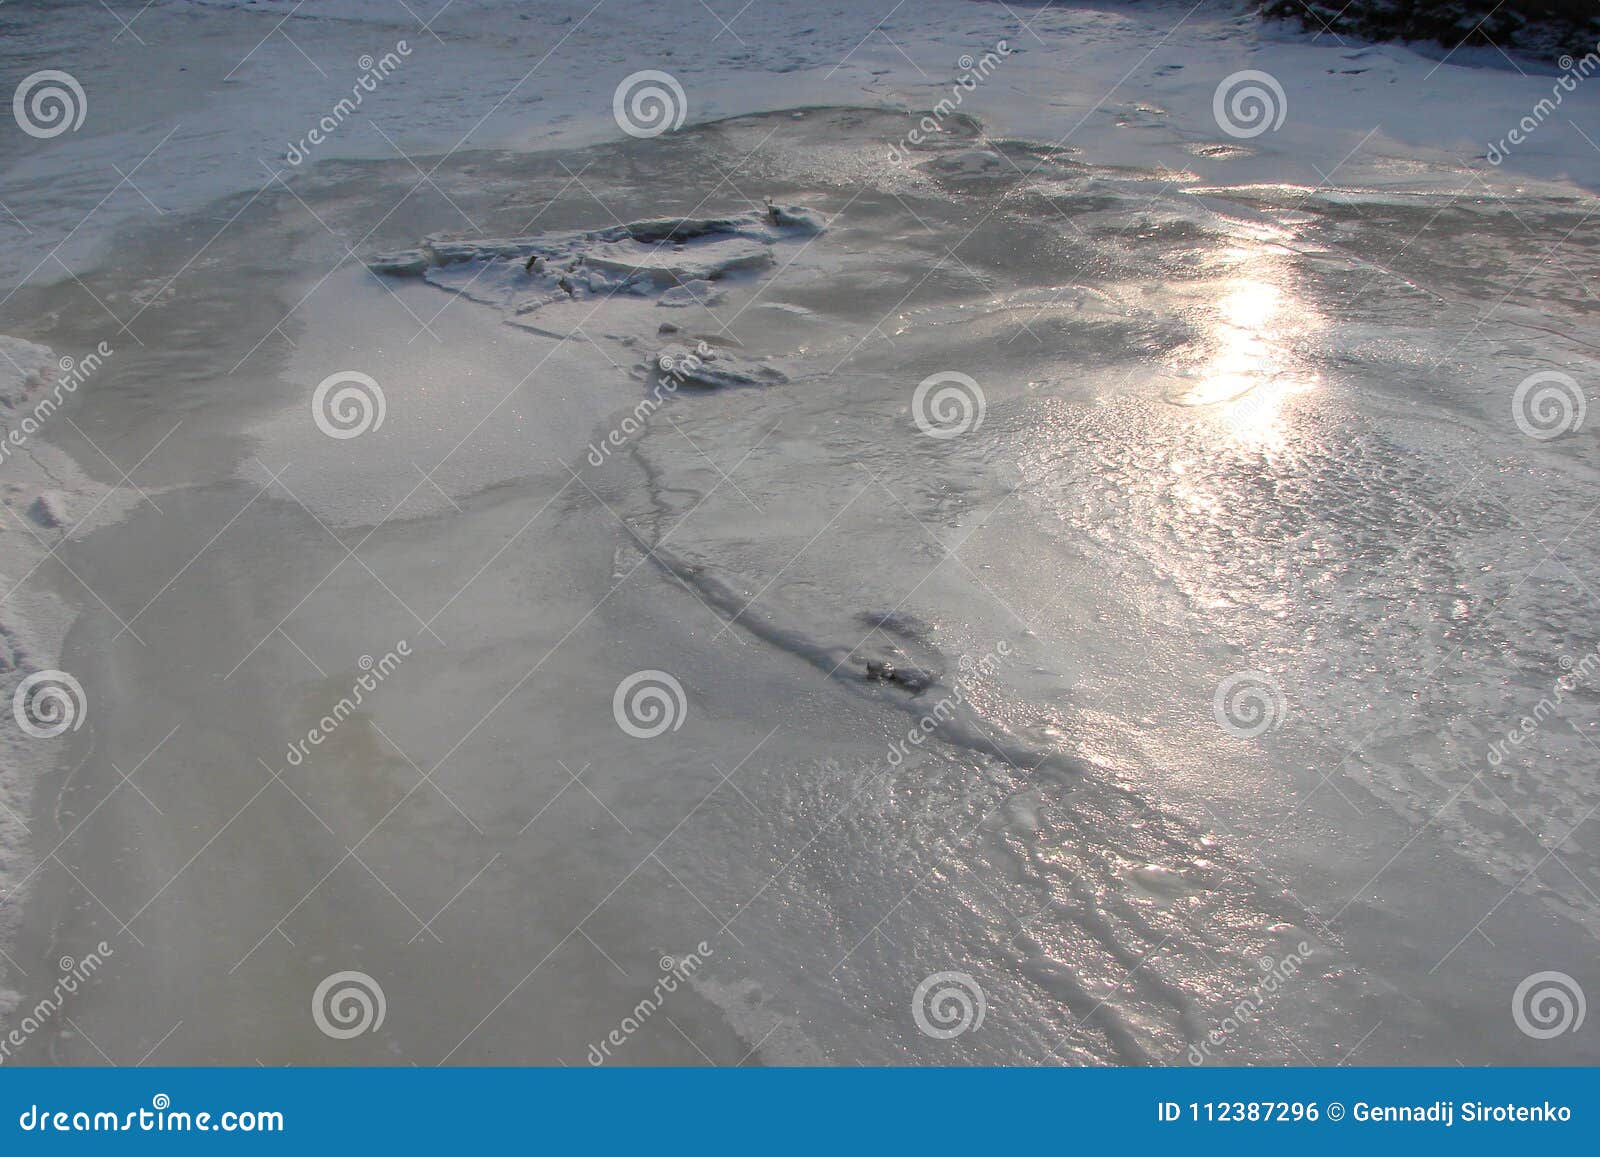 The water mirror is covered with ice of the Dnieper River near the Khortitsa Island in the frosty winter. city of Zaporozhye. Ukra. Natural patterns of the ice surface of the Dnieper River, where the sun`s rays appear in a clear, frosty day.